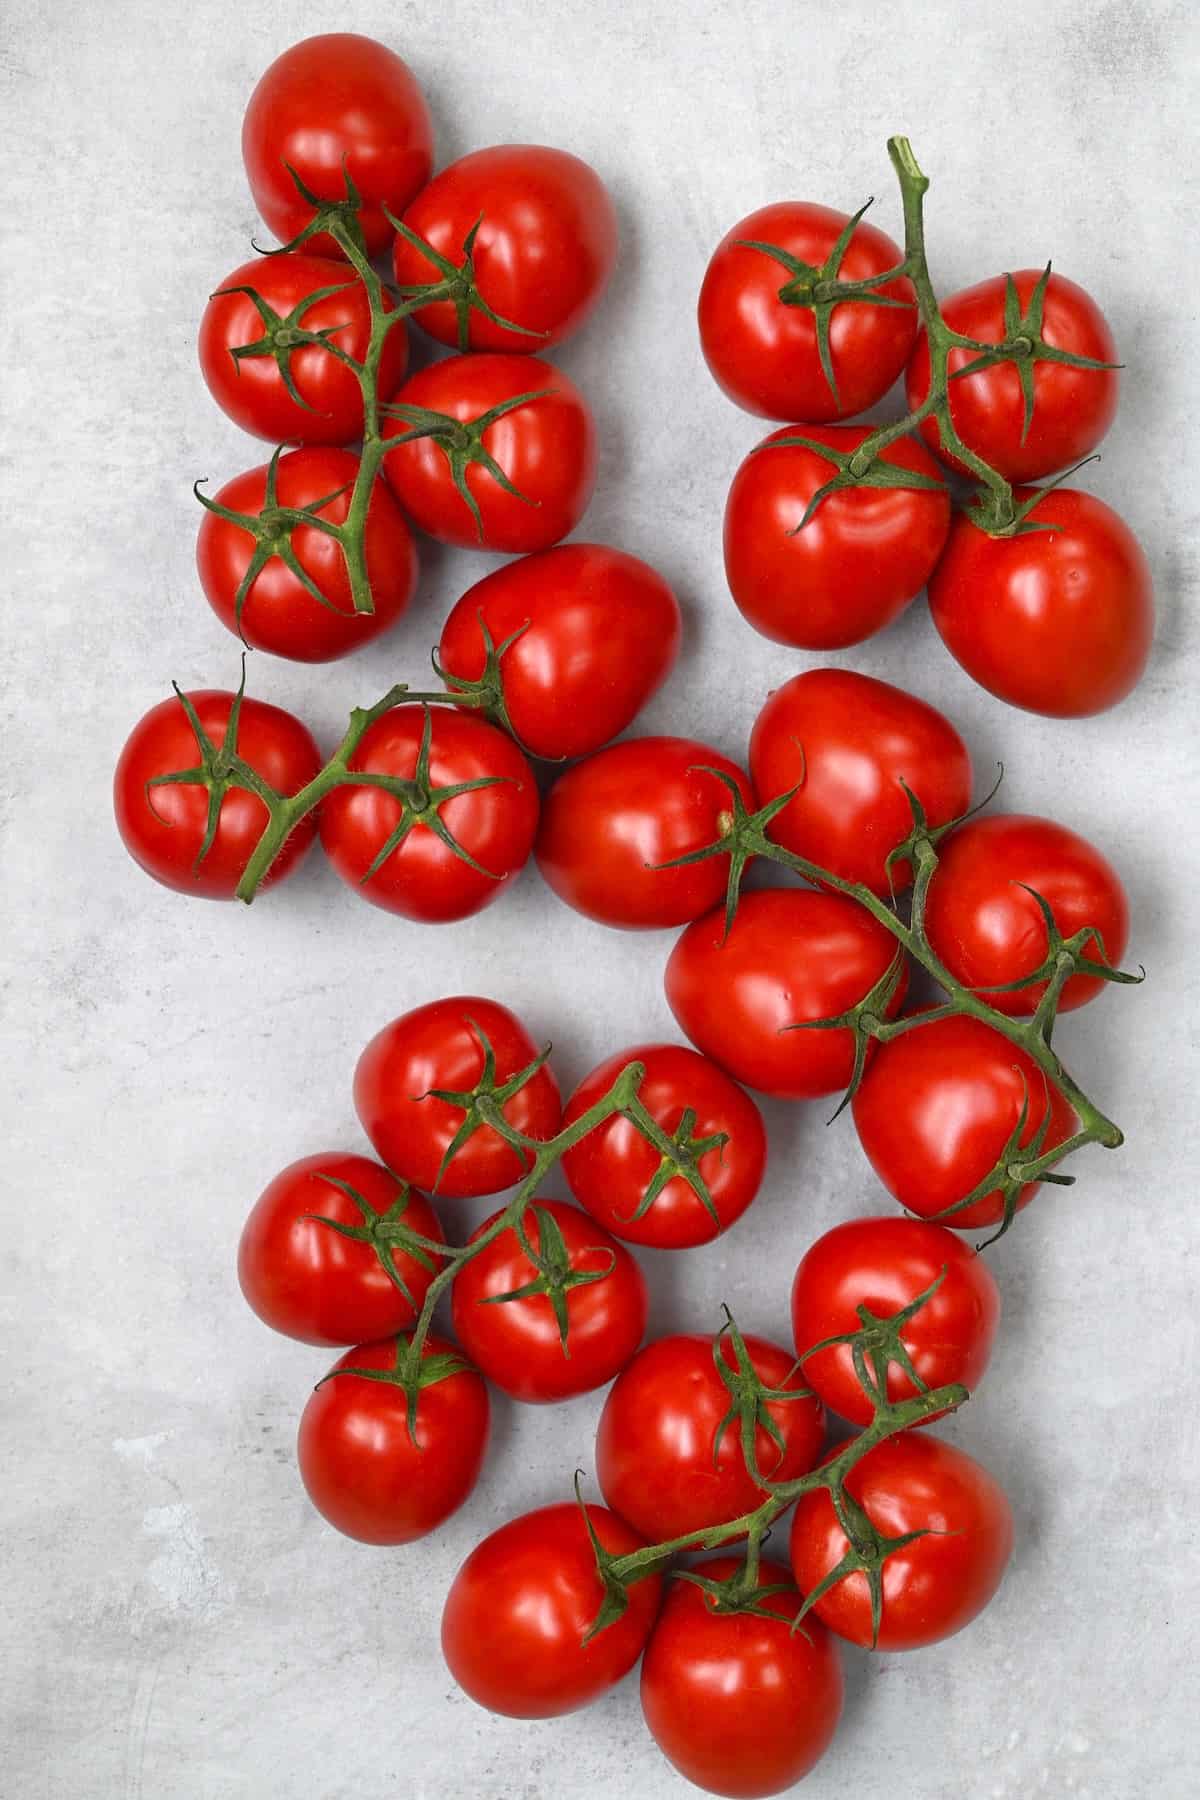 A bunch of tomatoes on a flat surface